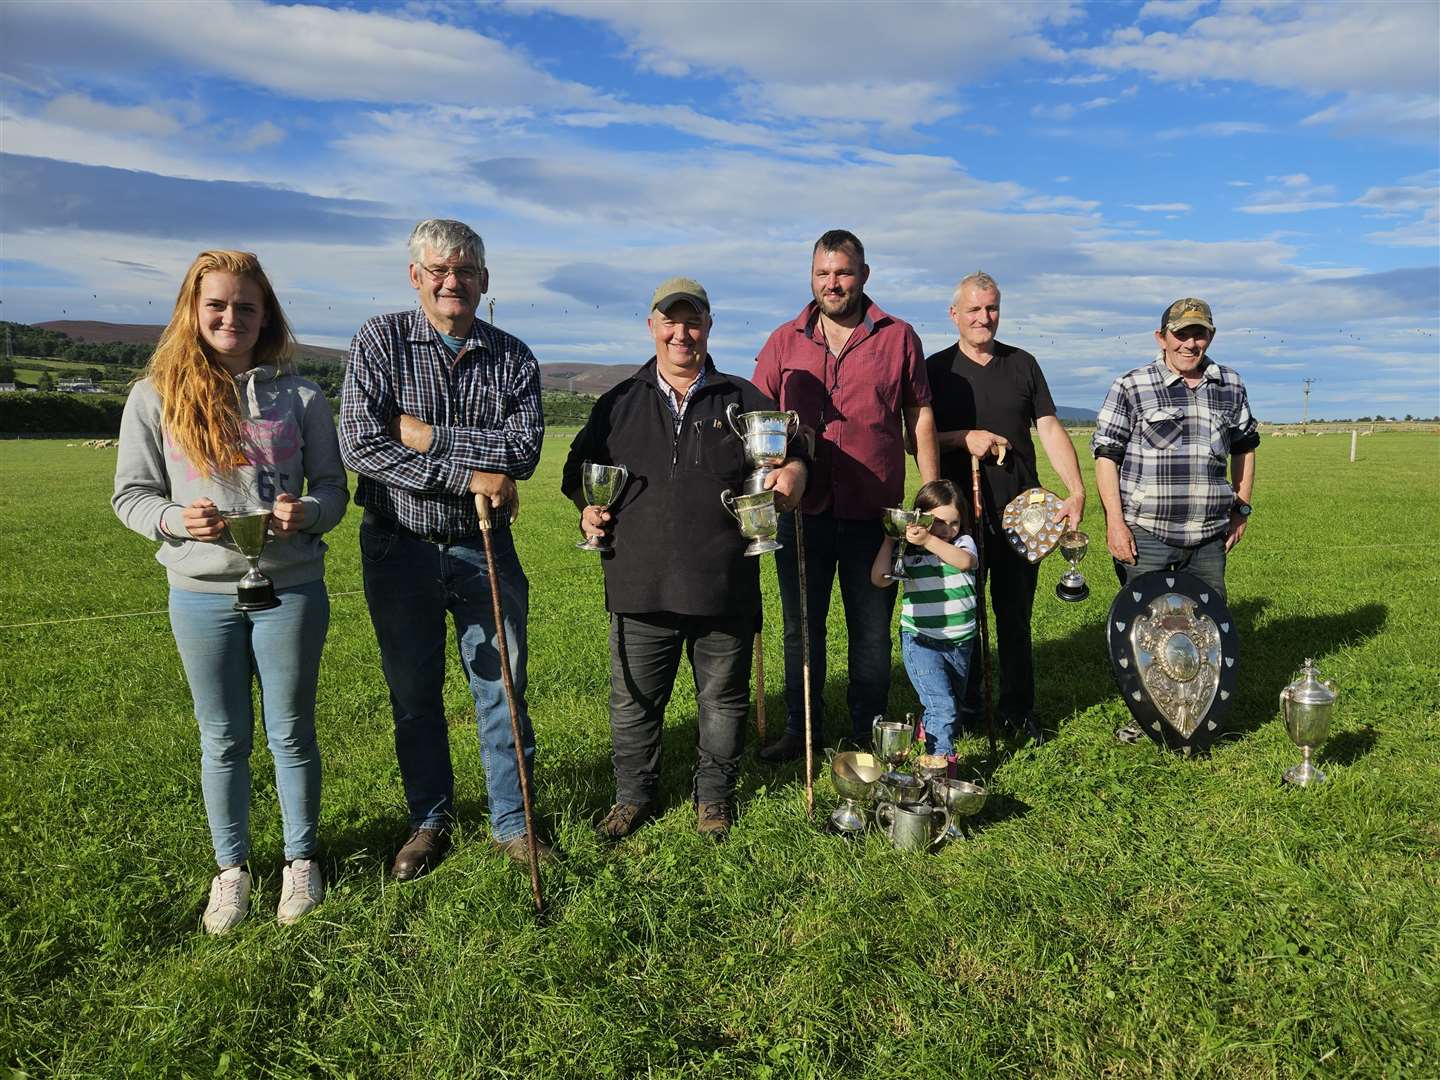 Some of the winners at last Saturday's sheepdog trials at Clynelish Farm, Brora.